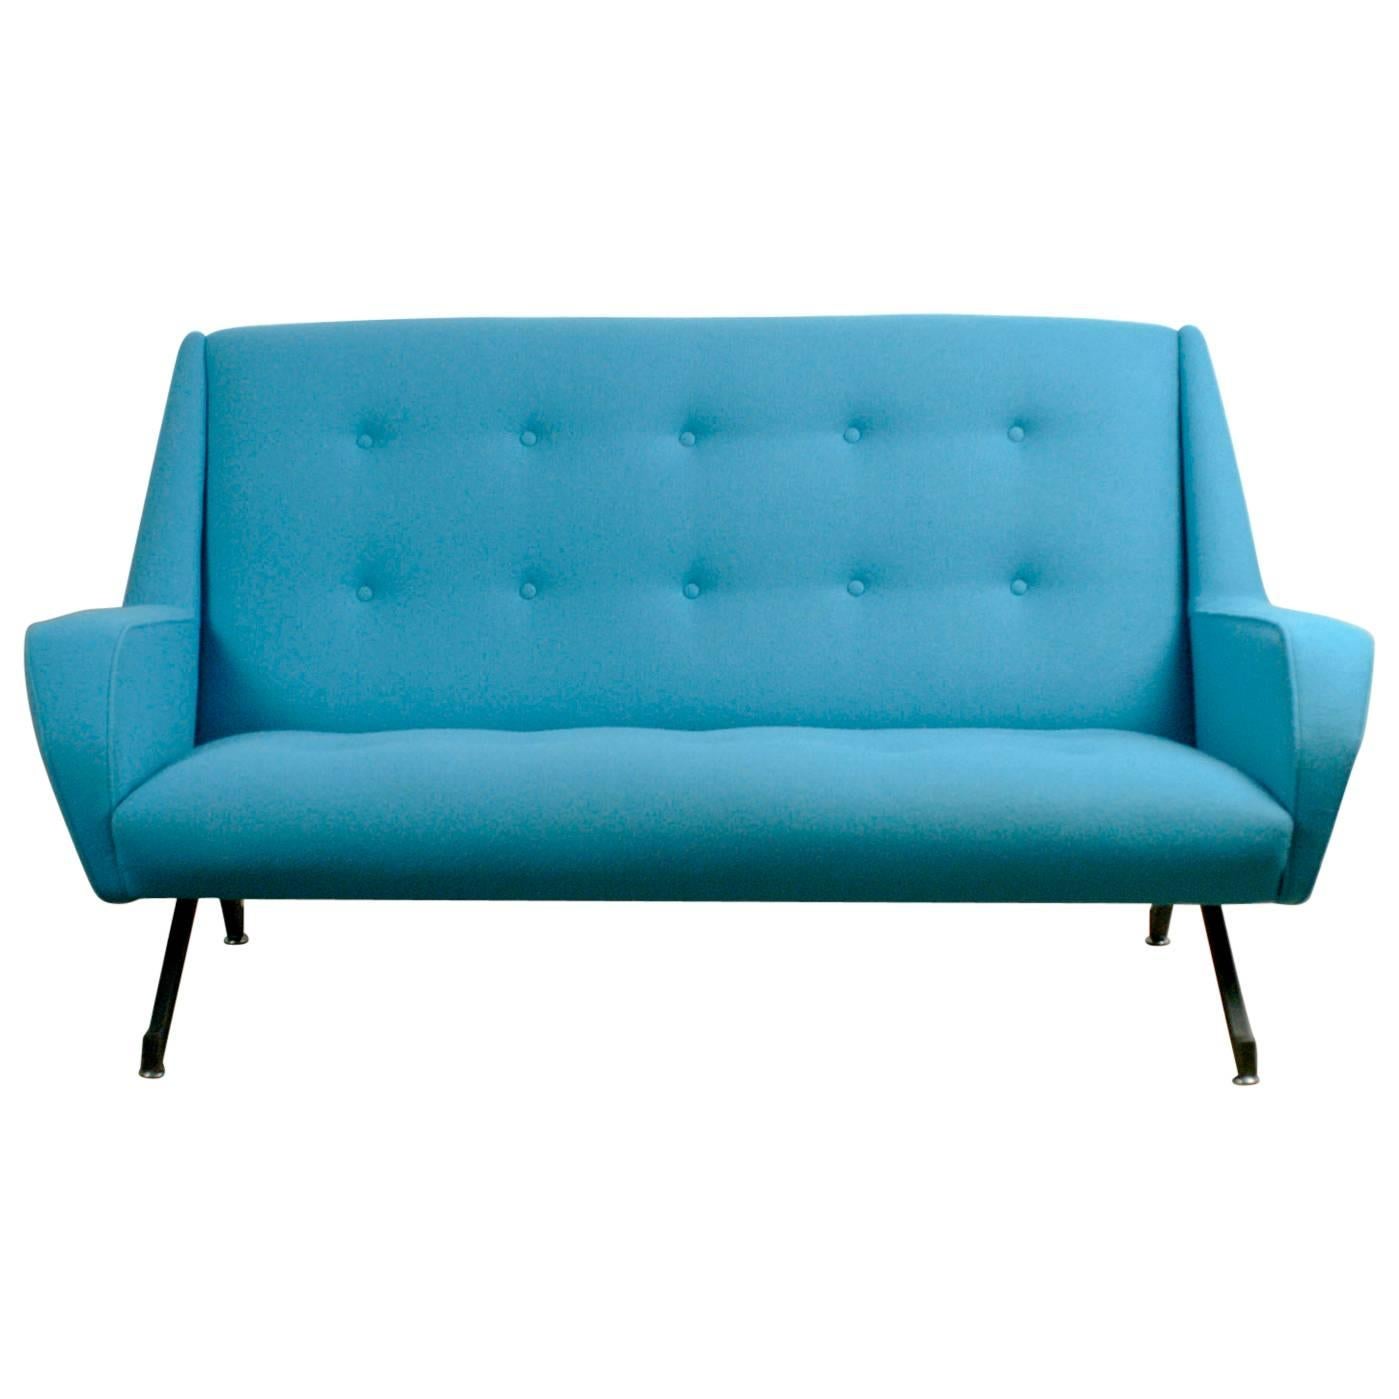 Blue and Black Metall Italian Midcentury Sofa in the Style of Ico Parisi